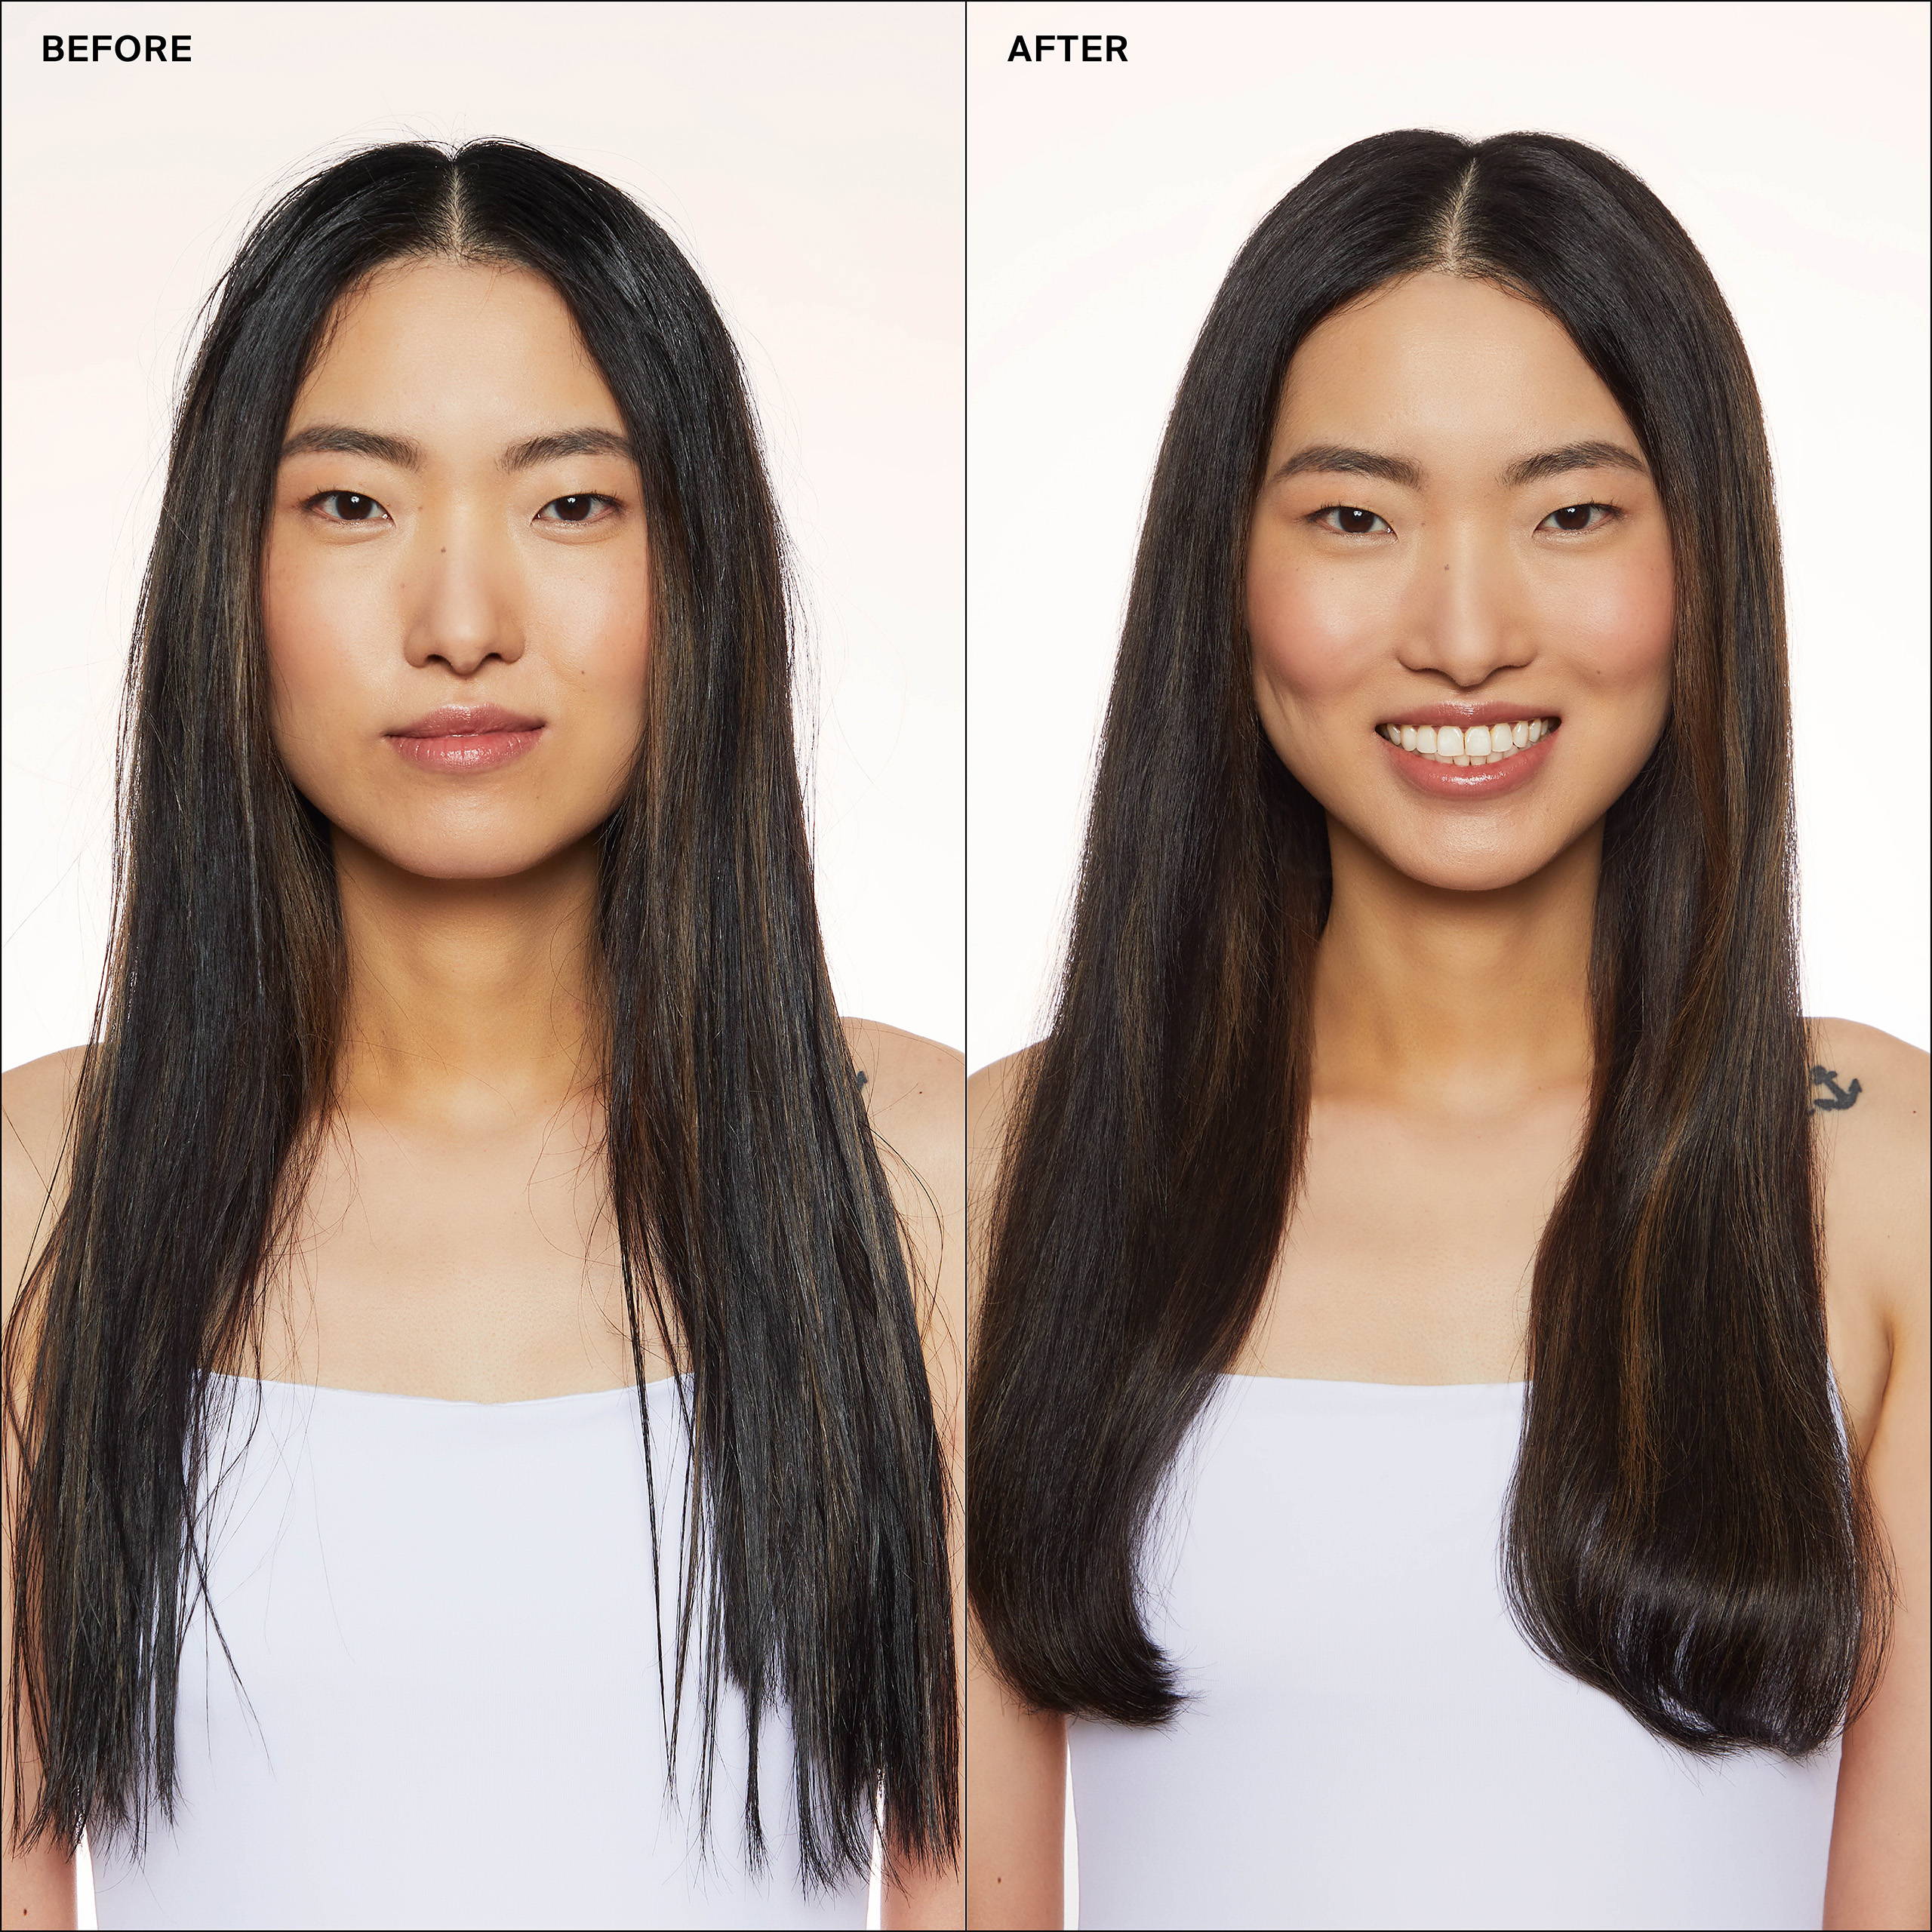 Before and After Image of using Eva NYC Freshen Up Invisible Dry Shampoo